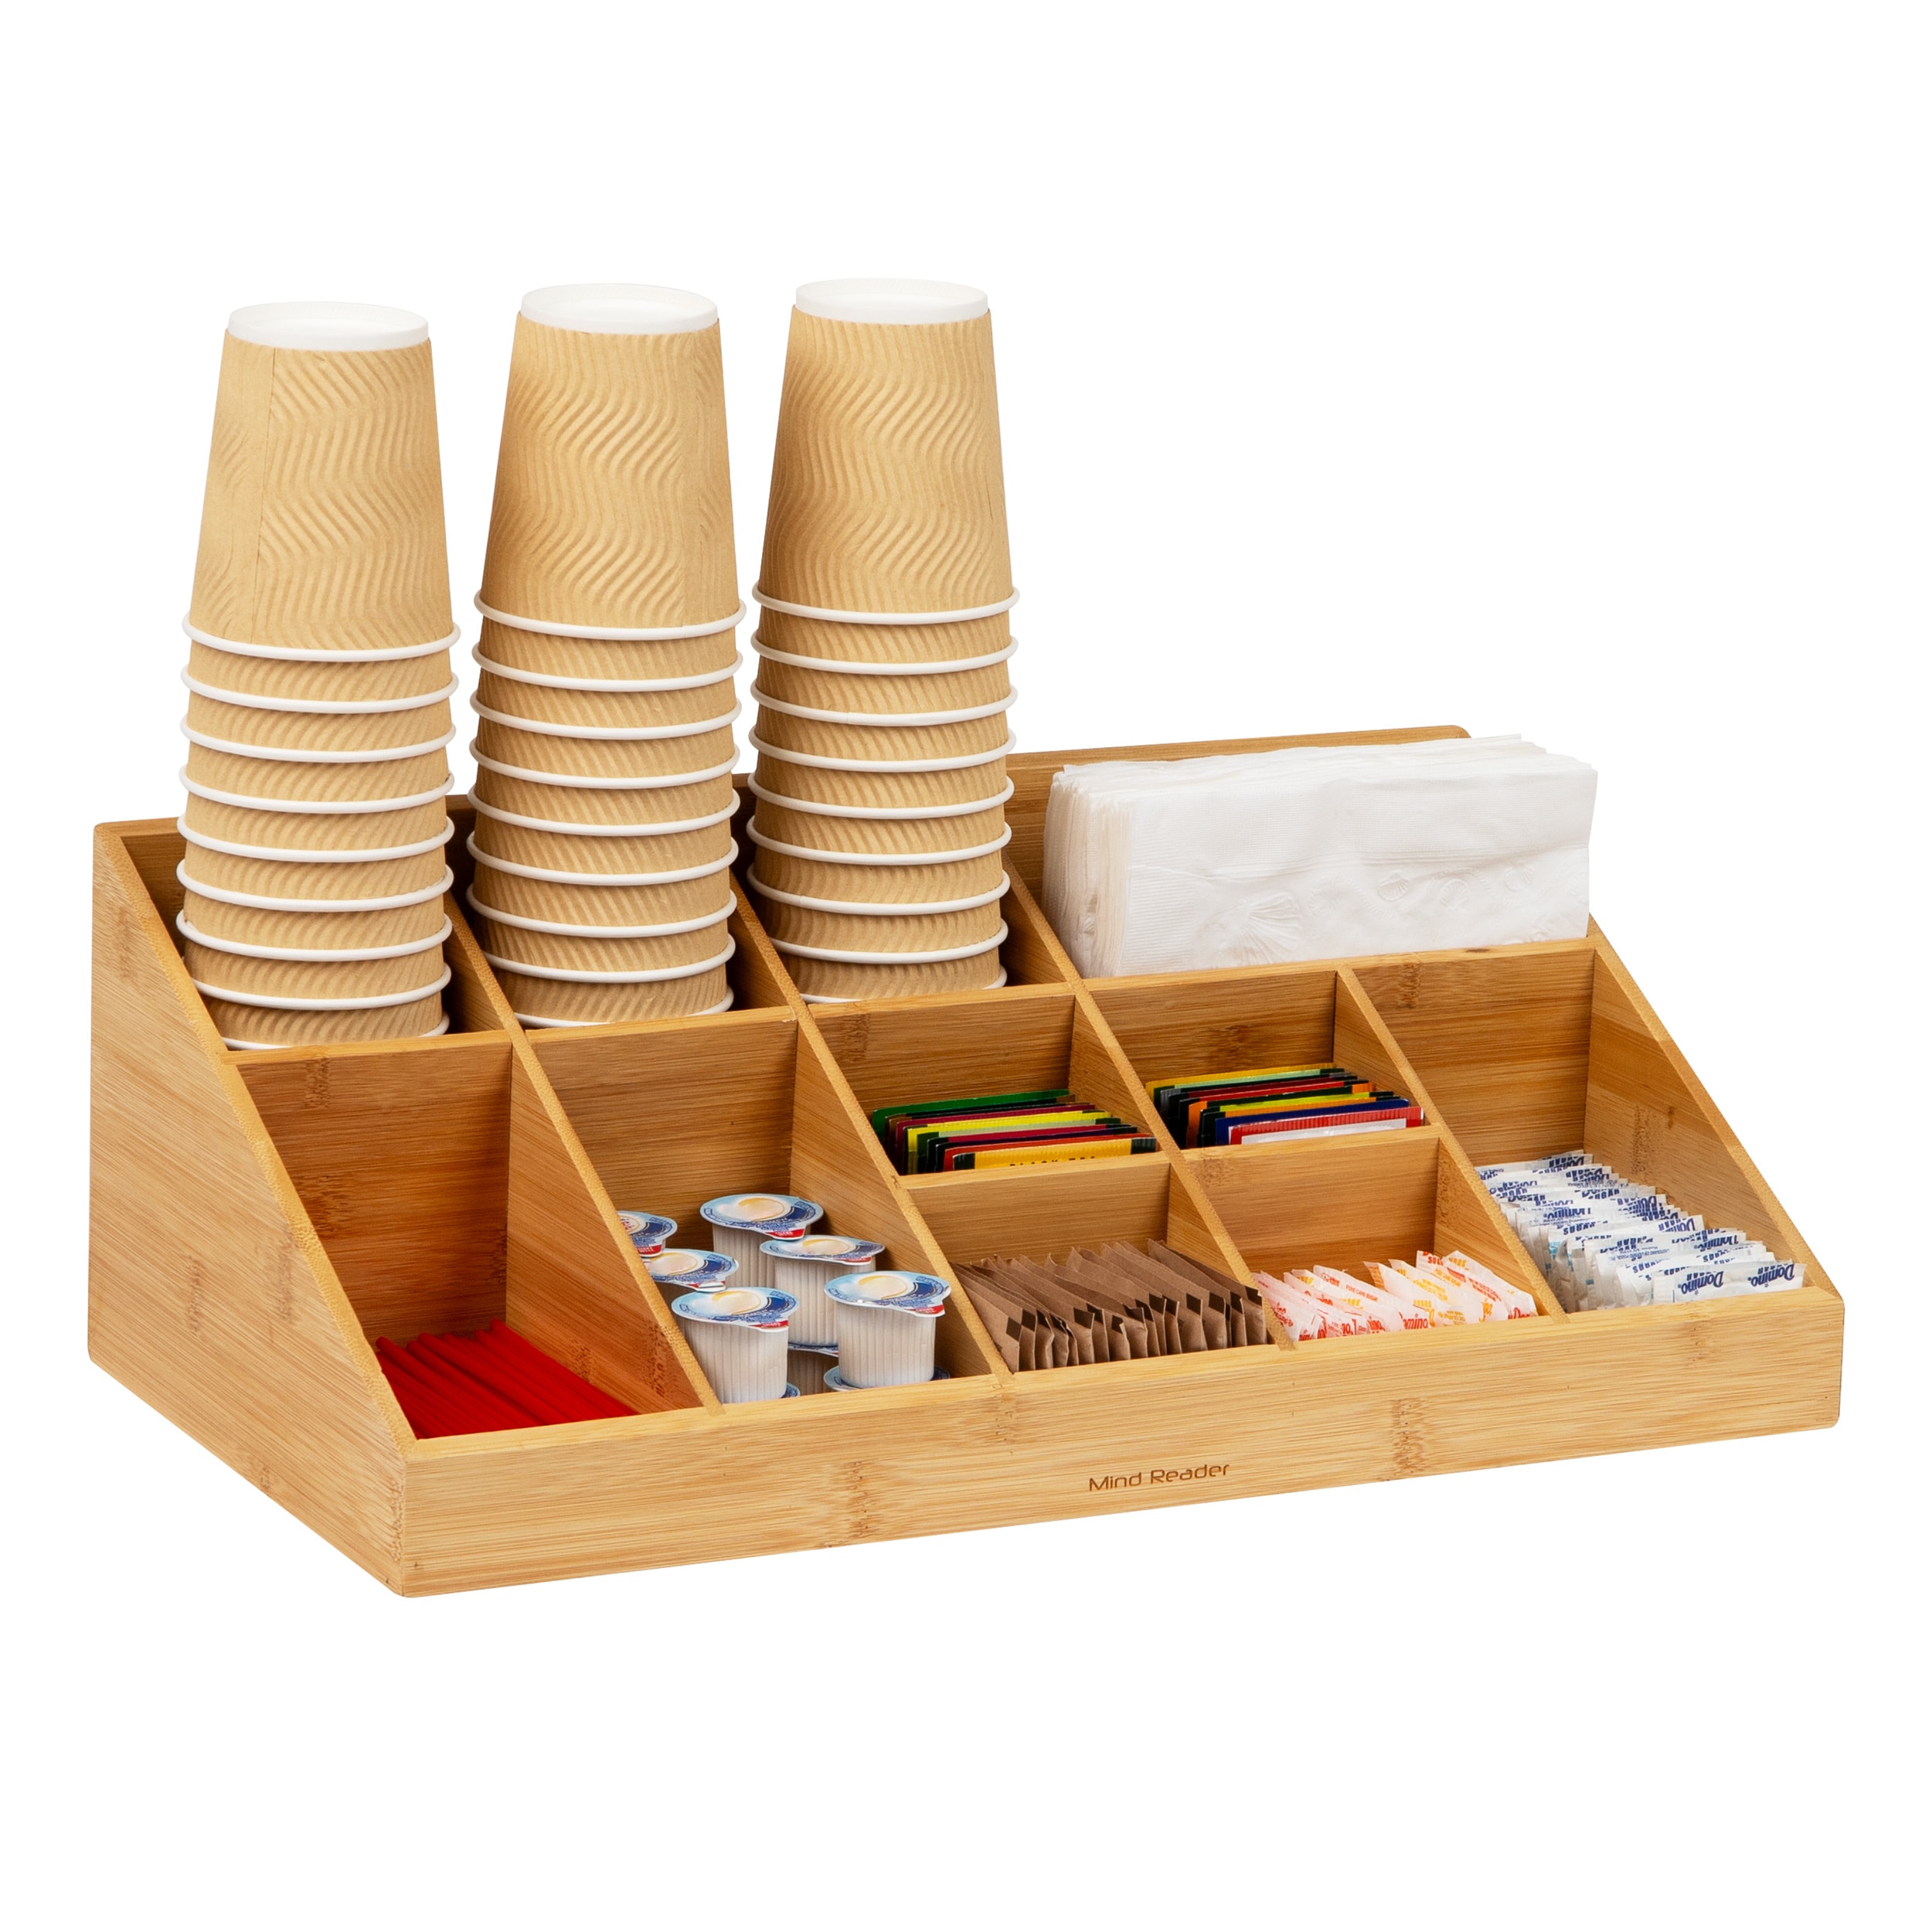 Mind Reader Anchor Collection 14 Compartment3 Tier Coffee Cup And